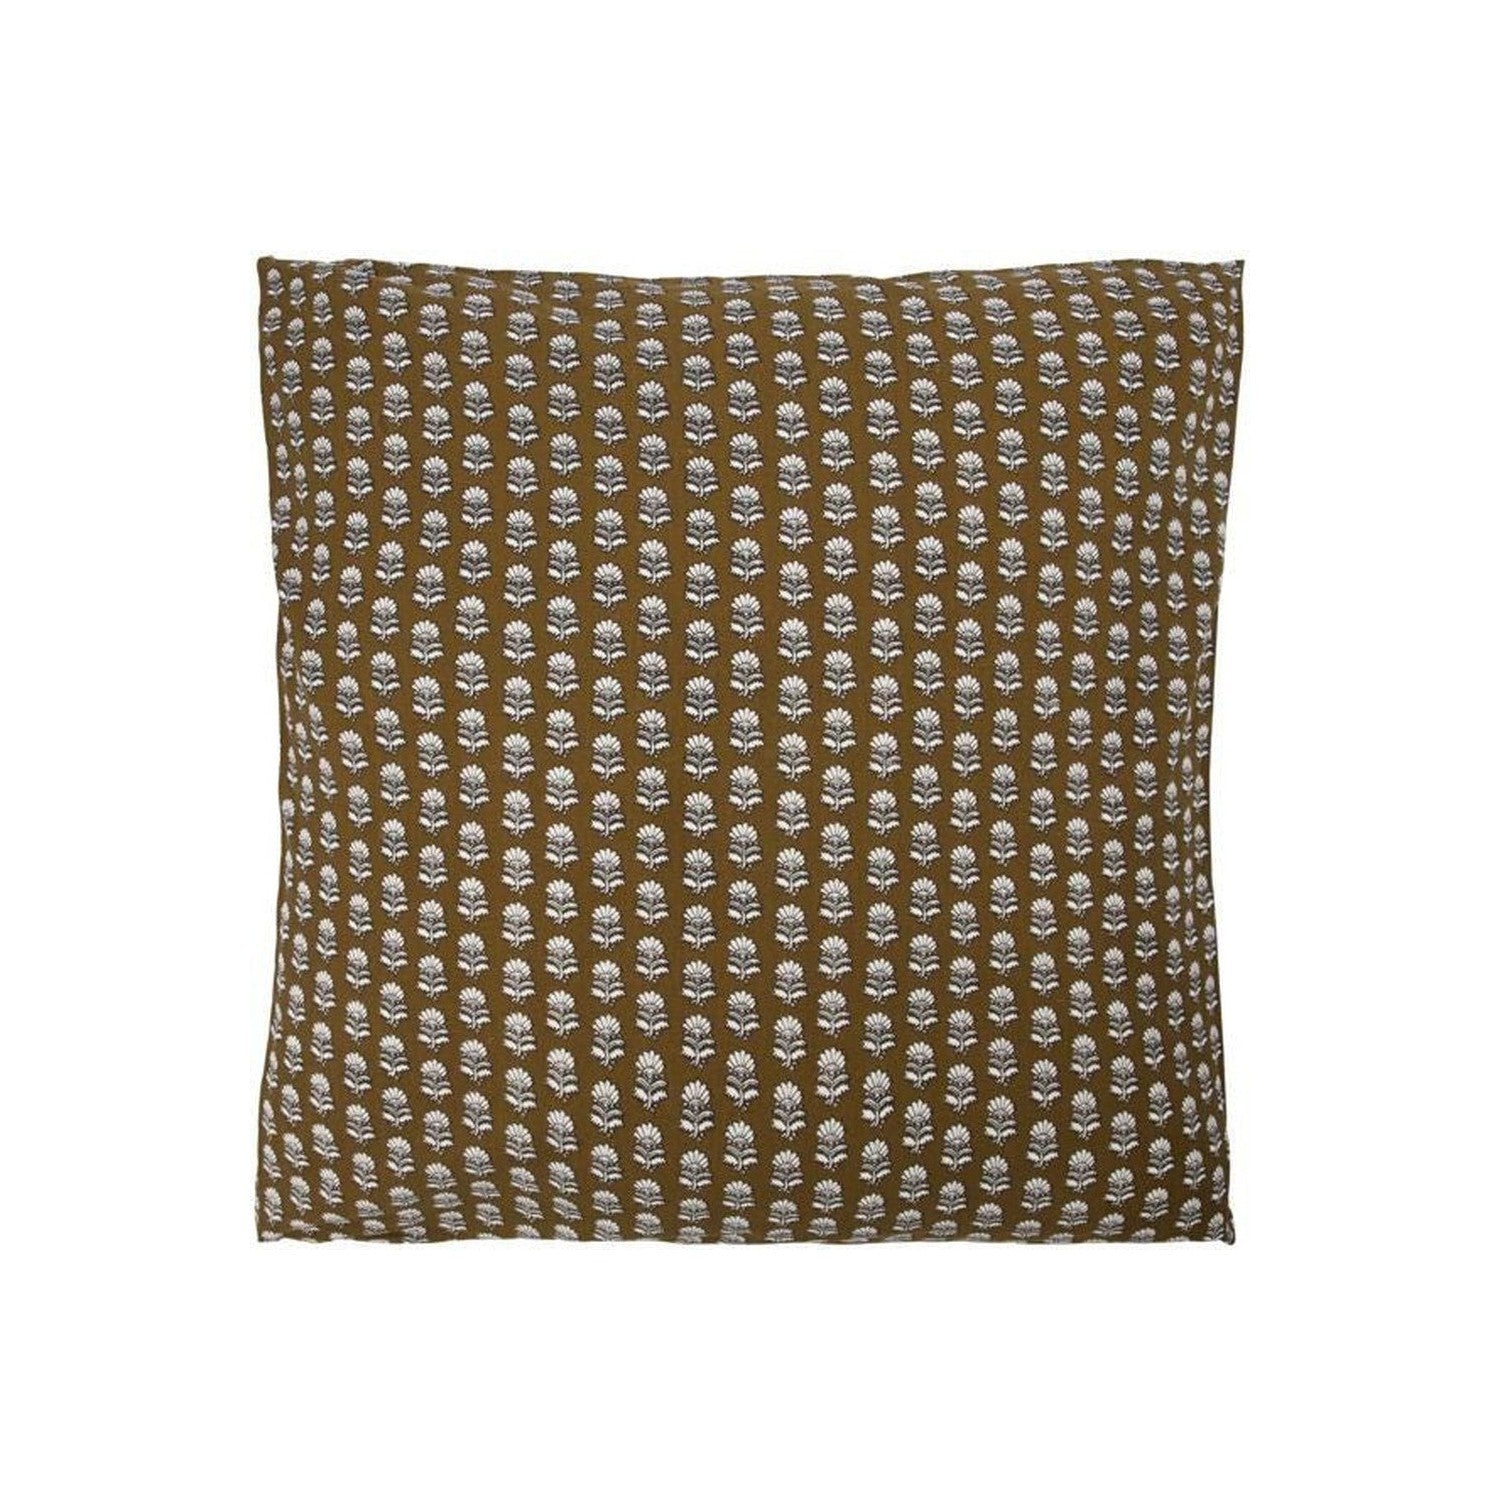 House Doctor Cushion cover, HDNero, Camel